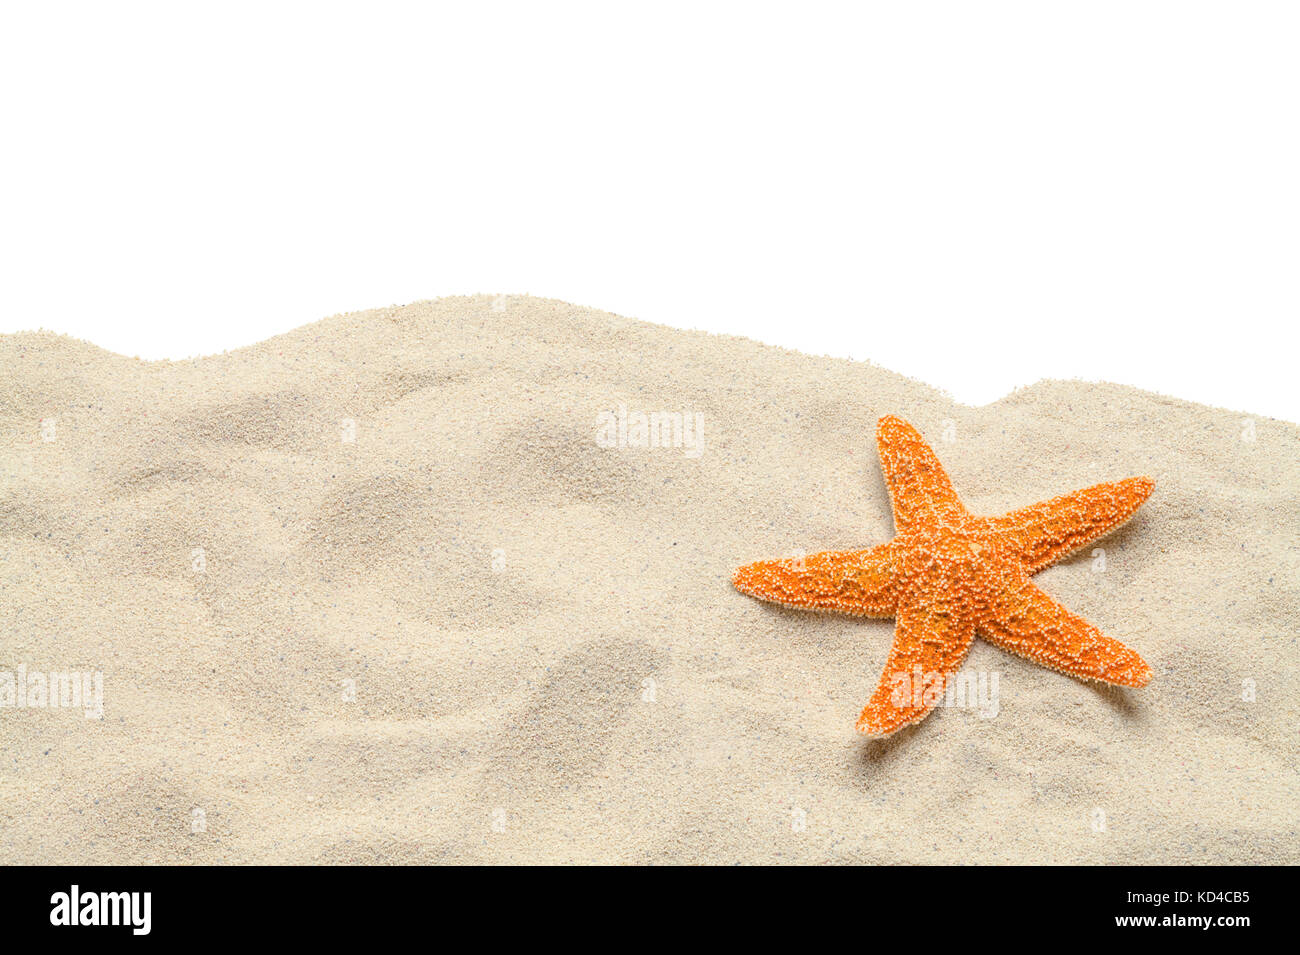 Beach Sand and Starfish with Copy Space Cut Out on White. Stock Photo